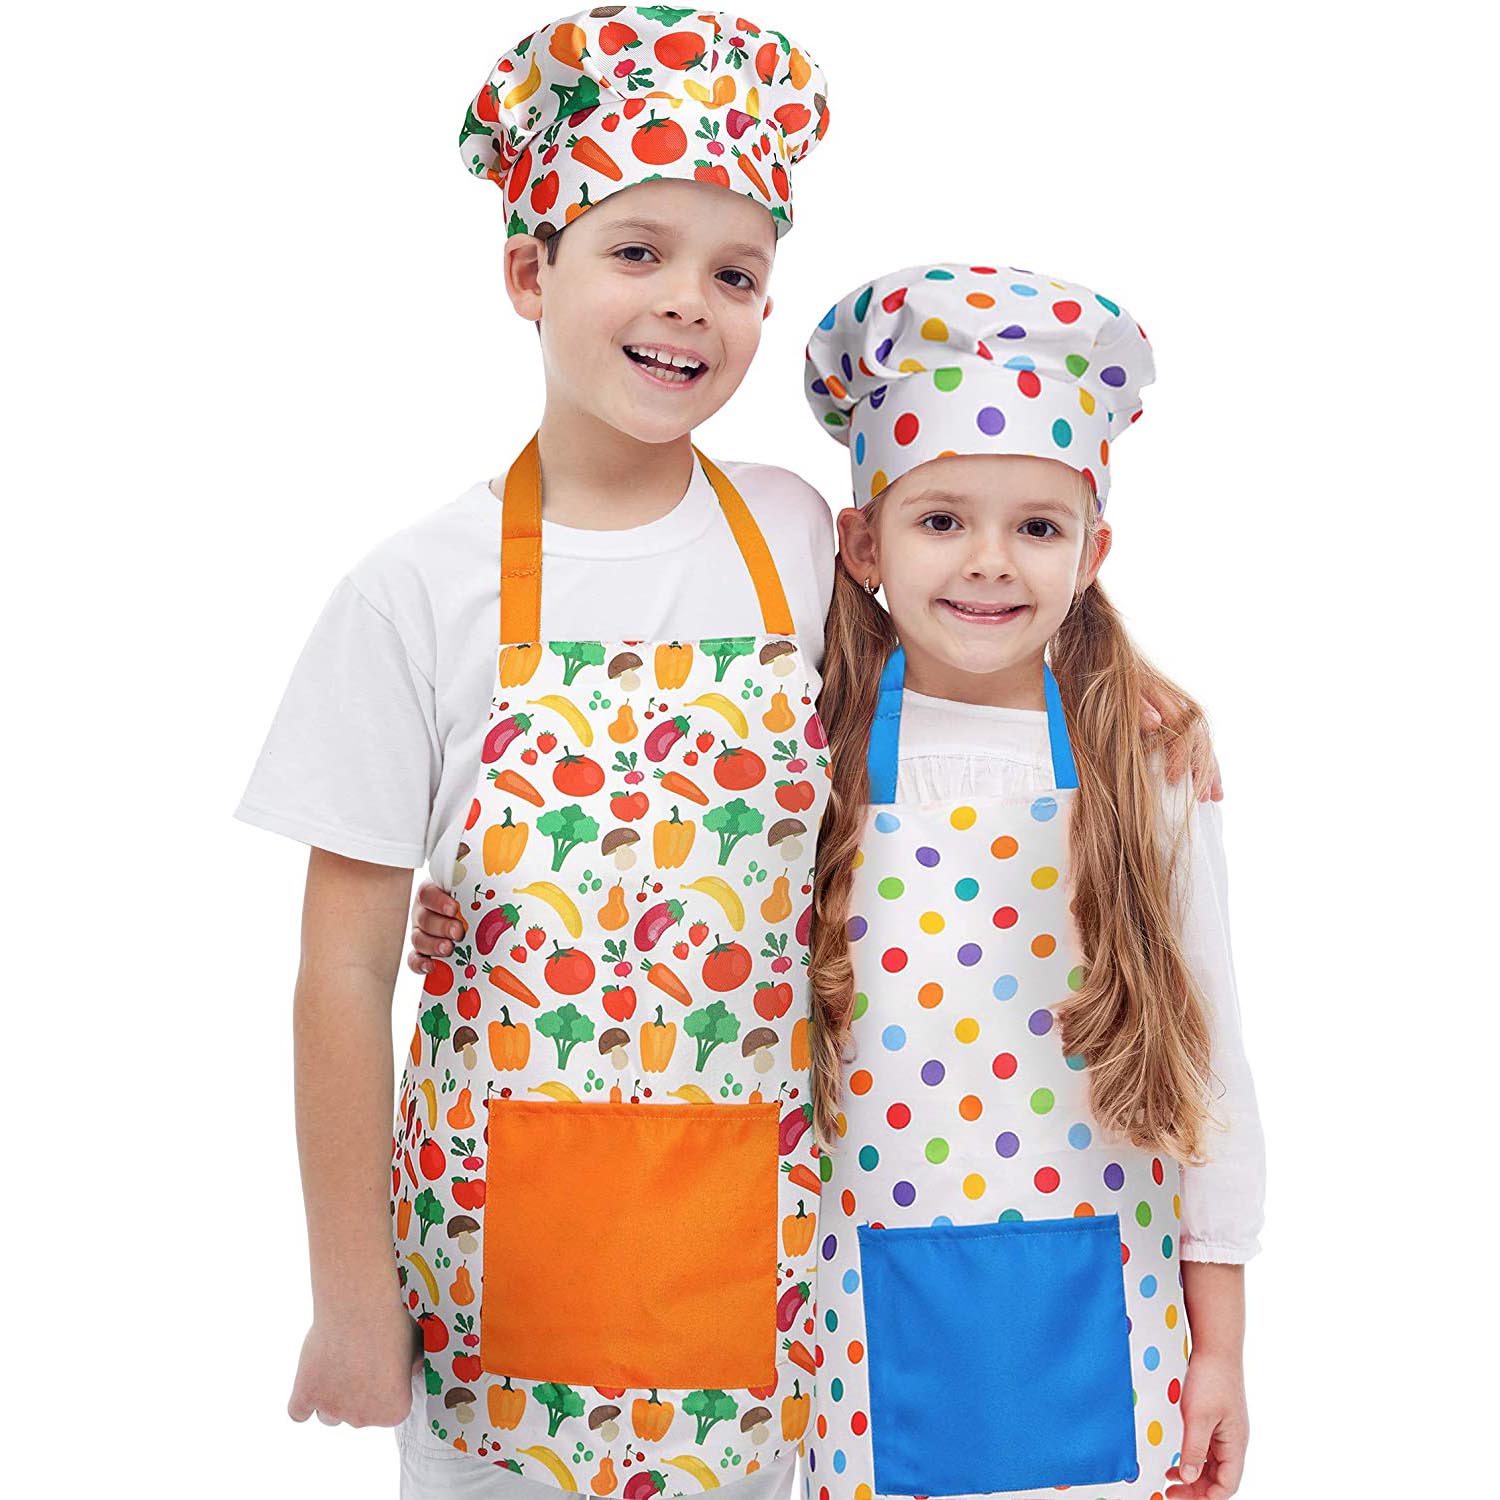 Boy And Girl Wearing RiseBrite Polka Dot And Vegetable Aprons And Chef Hats